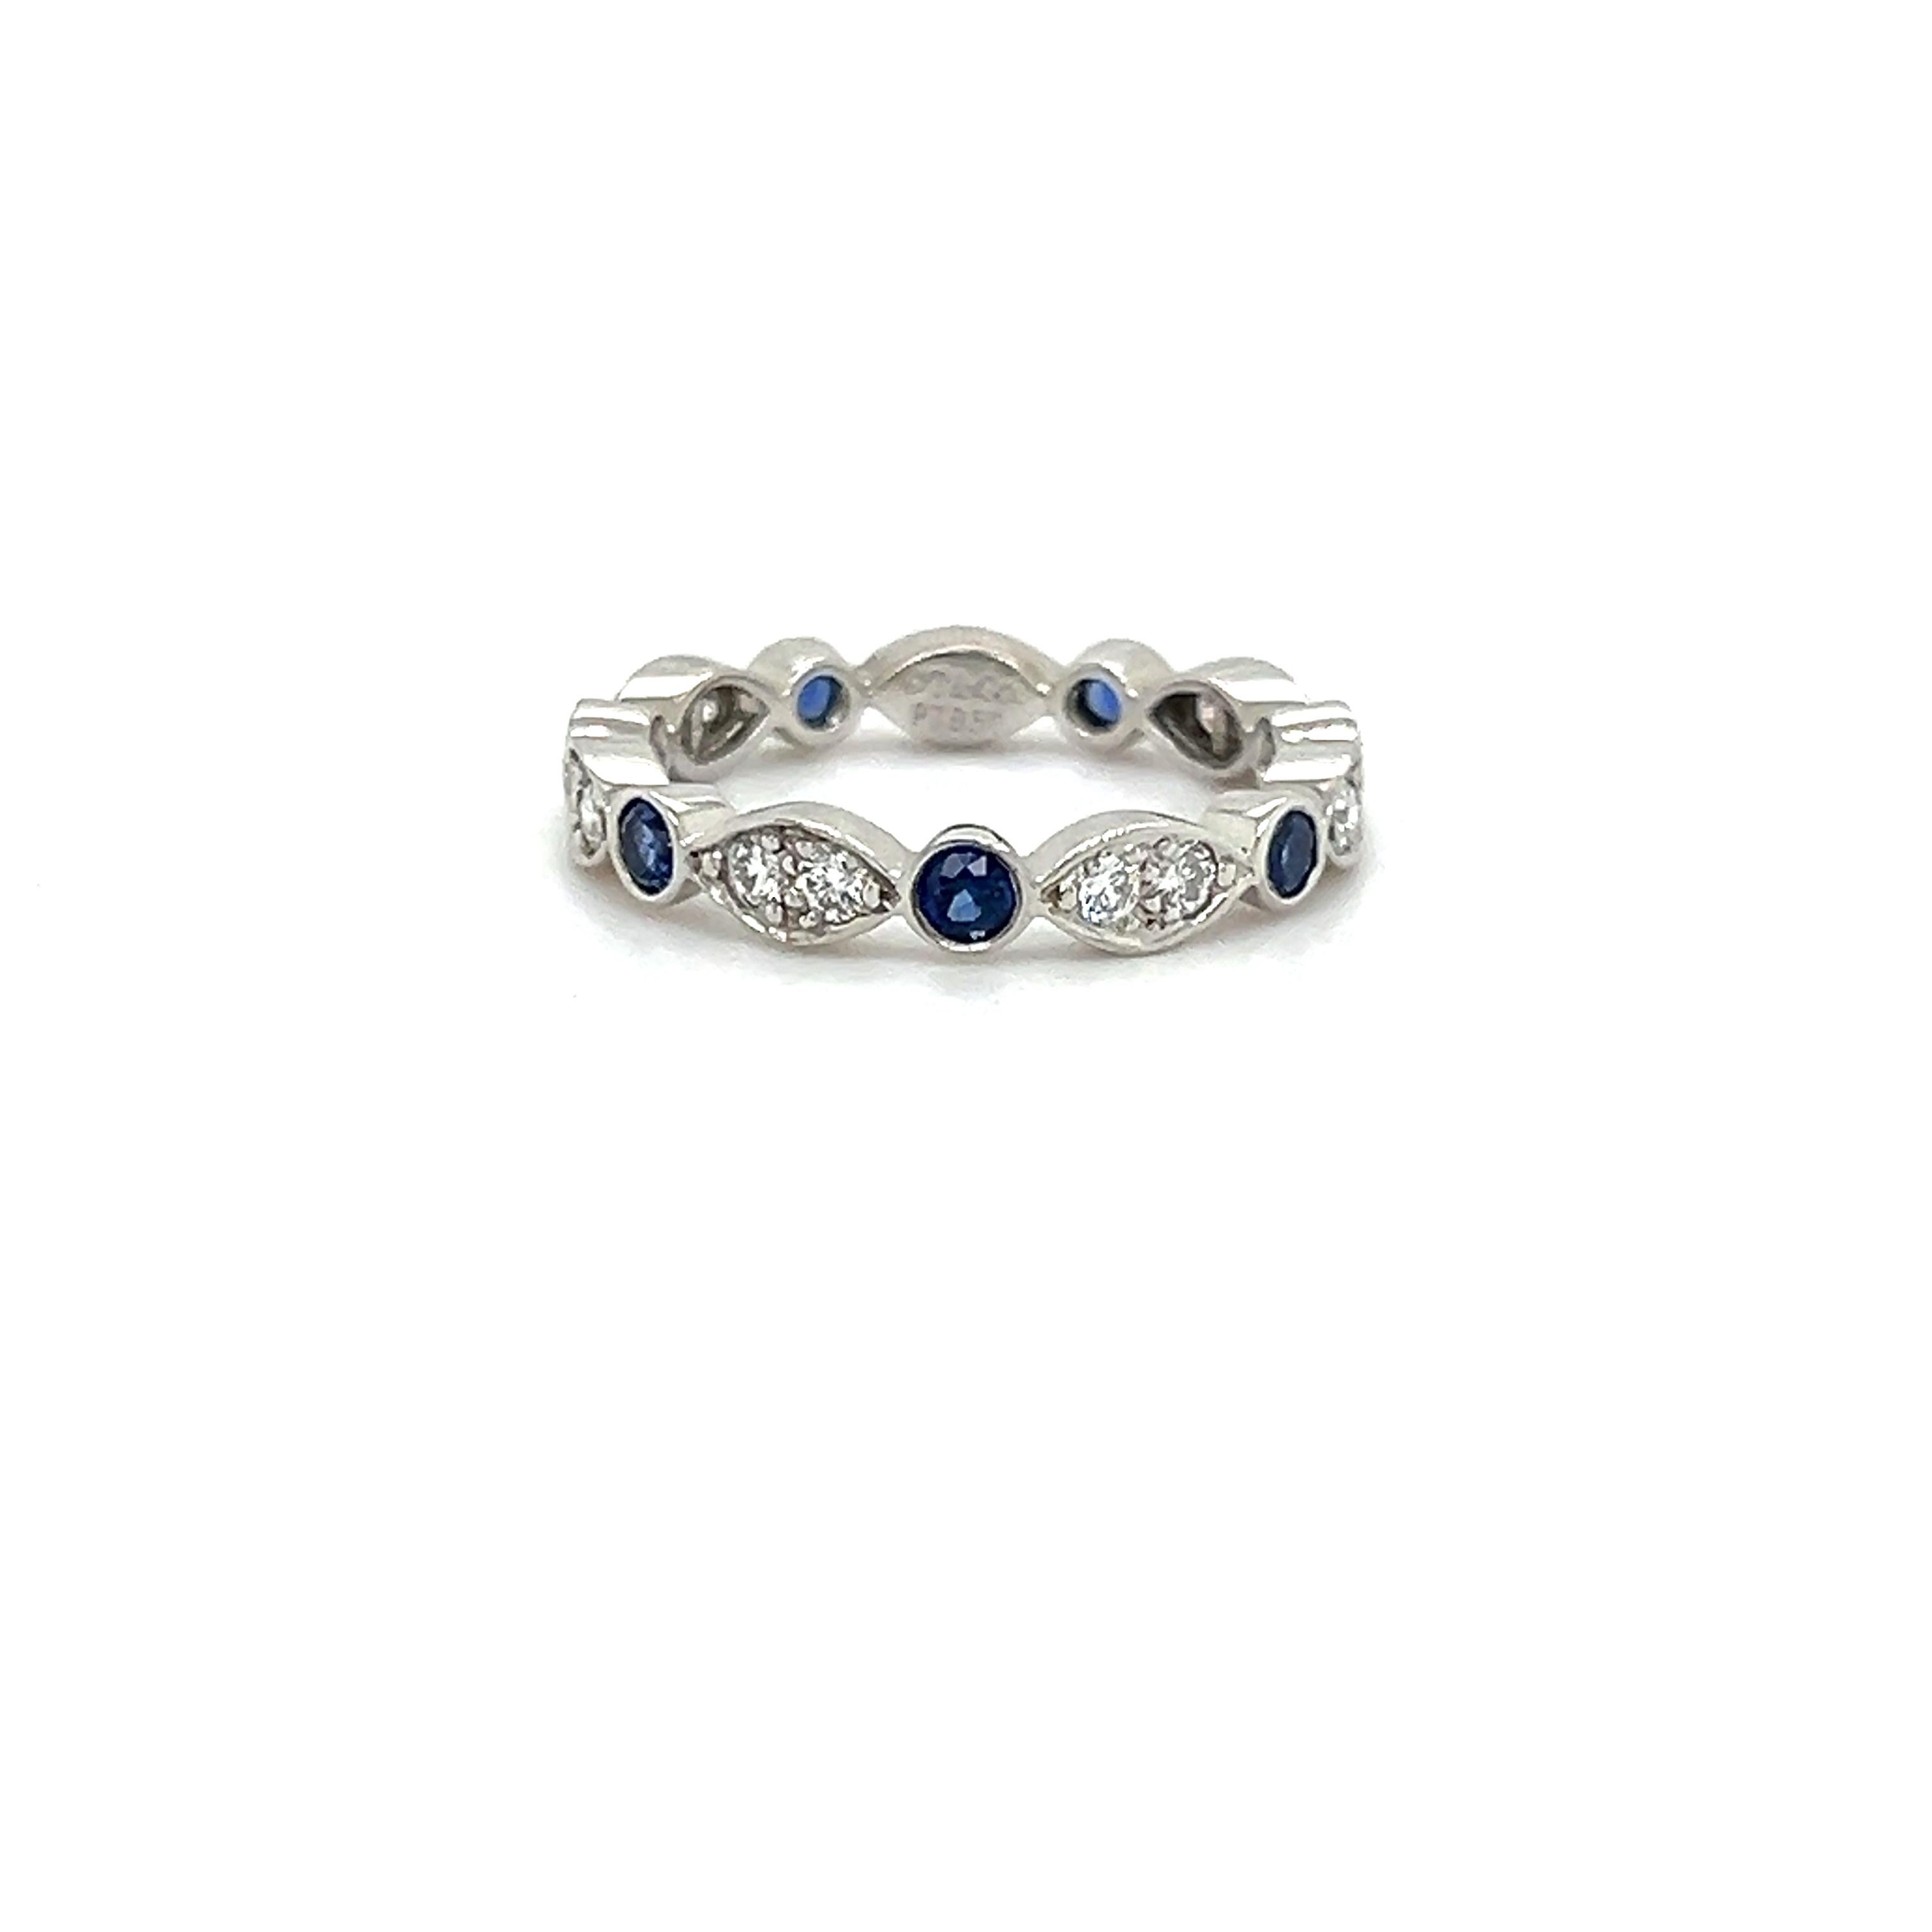 Beautiful ring from famed designer Tiffany & Co. This elegant ring is crafted in platinum and showcases diamonds and blue sapphires that are bezel set in marquise and round  bezel set shapes. The ring is from the 